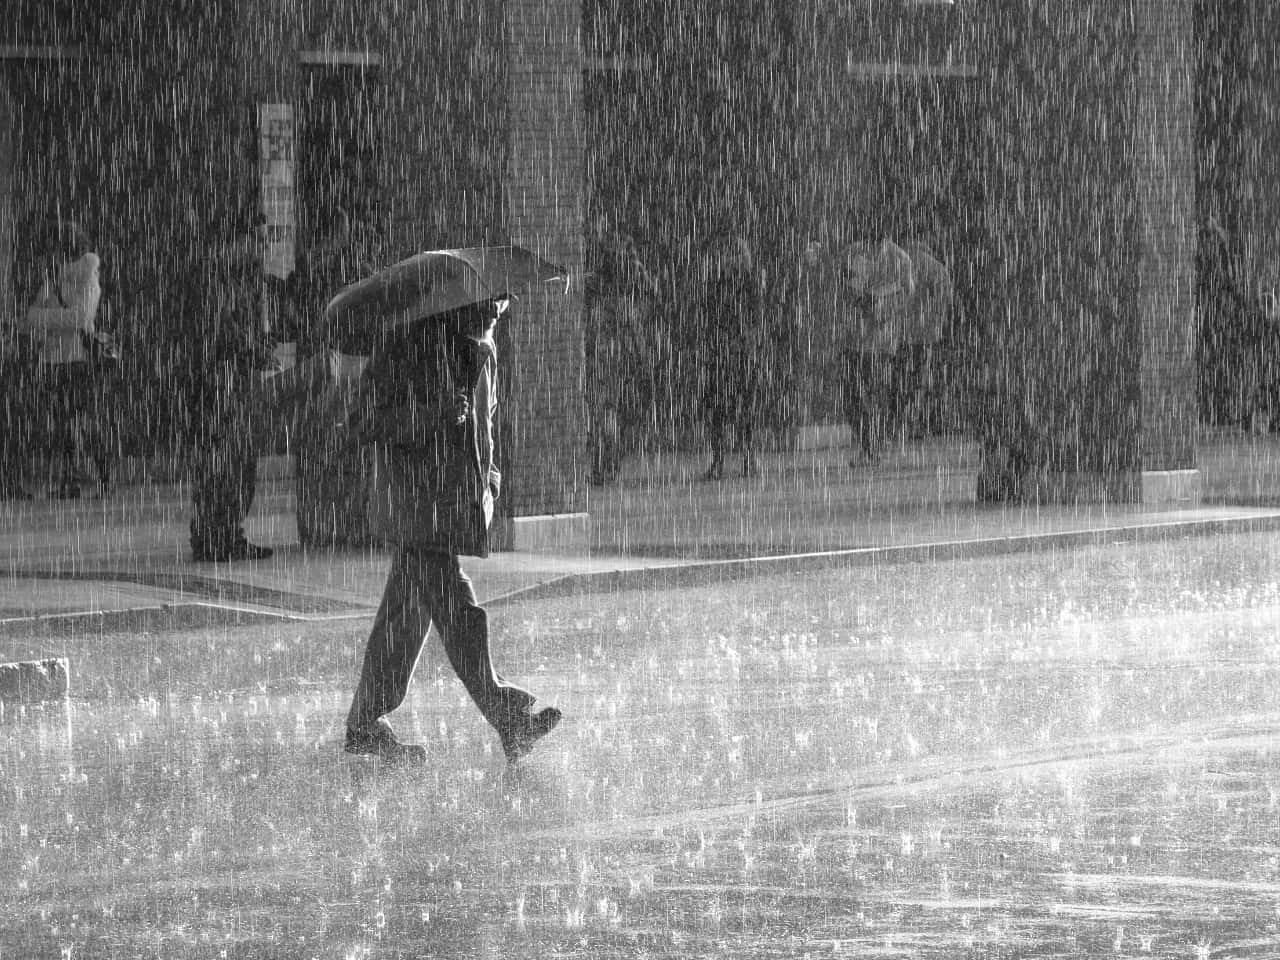 Man With Umbrella On Rainy Day In Black And White Picture